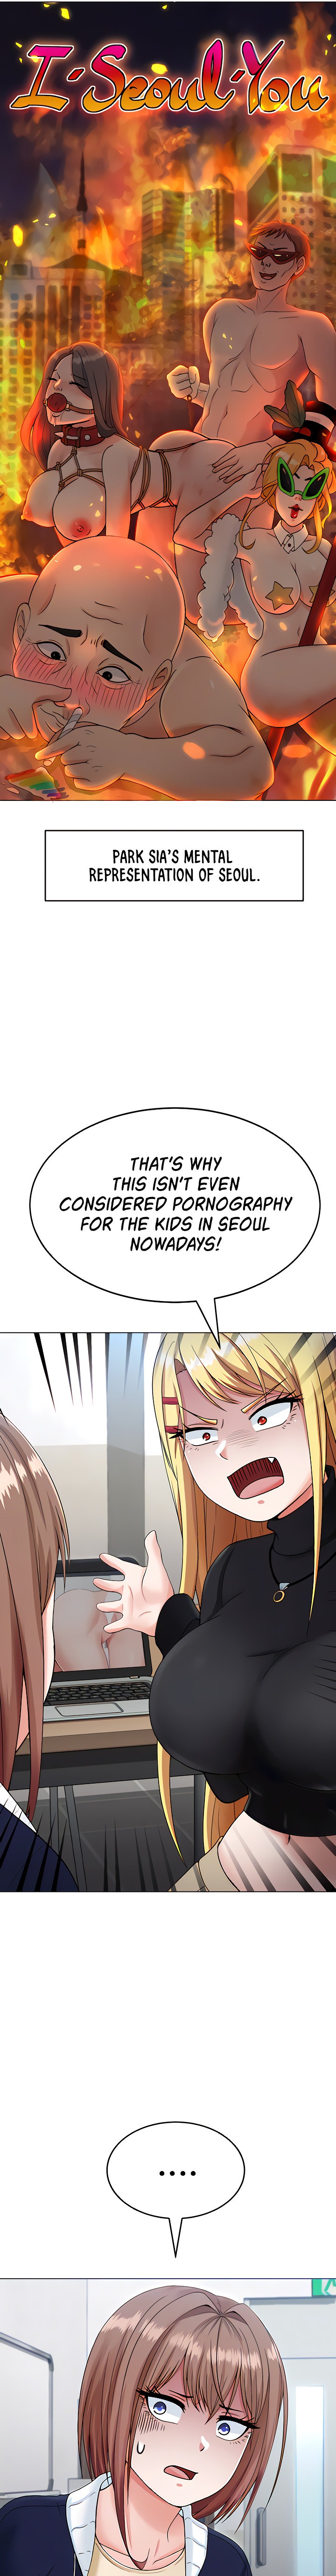 Seoul Kids These Days - Chapter 6 Page 3